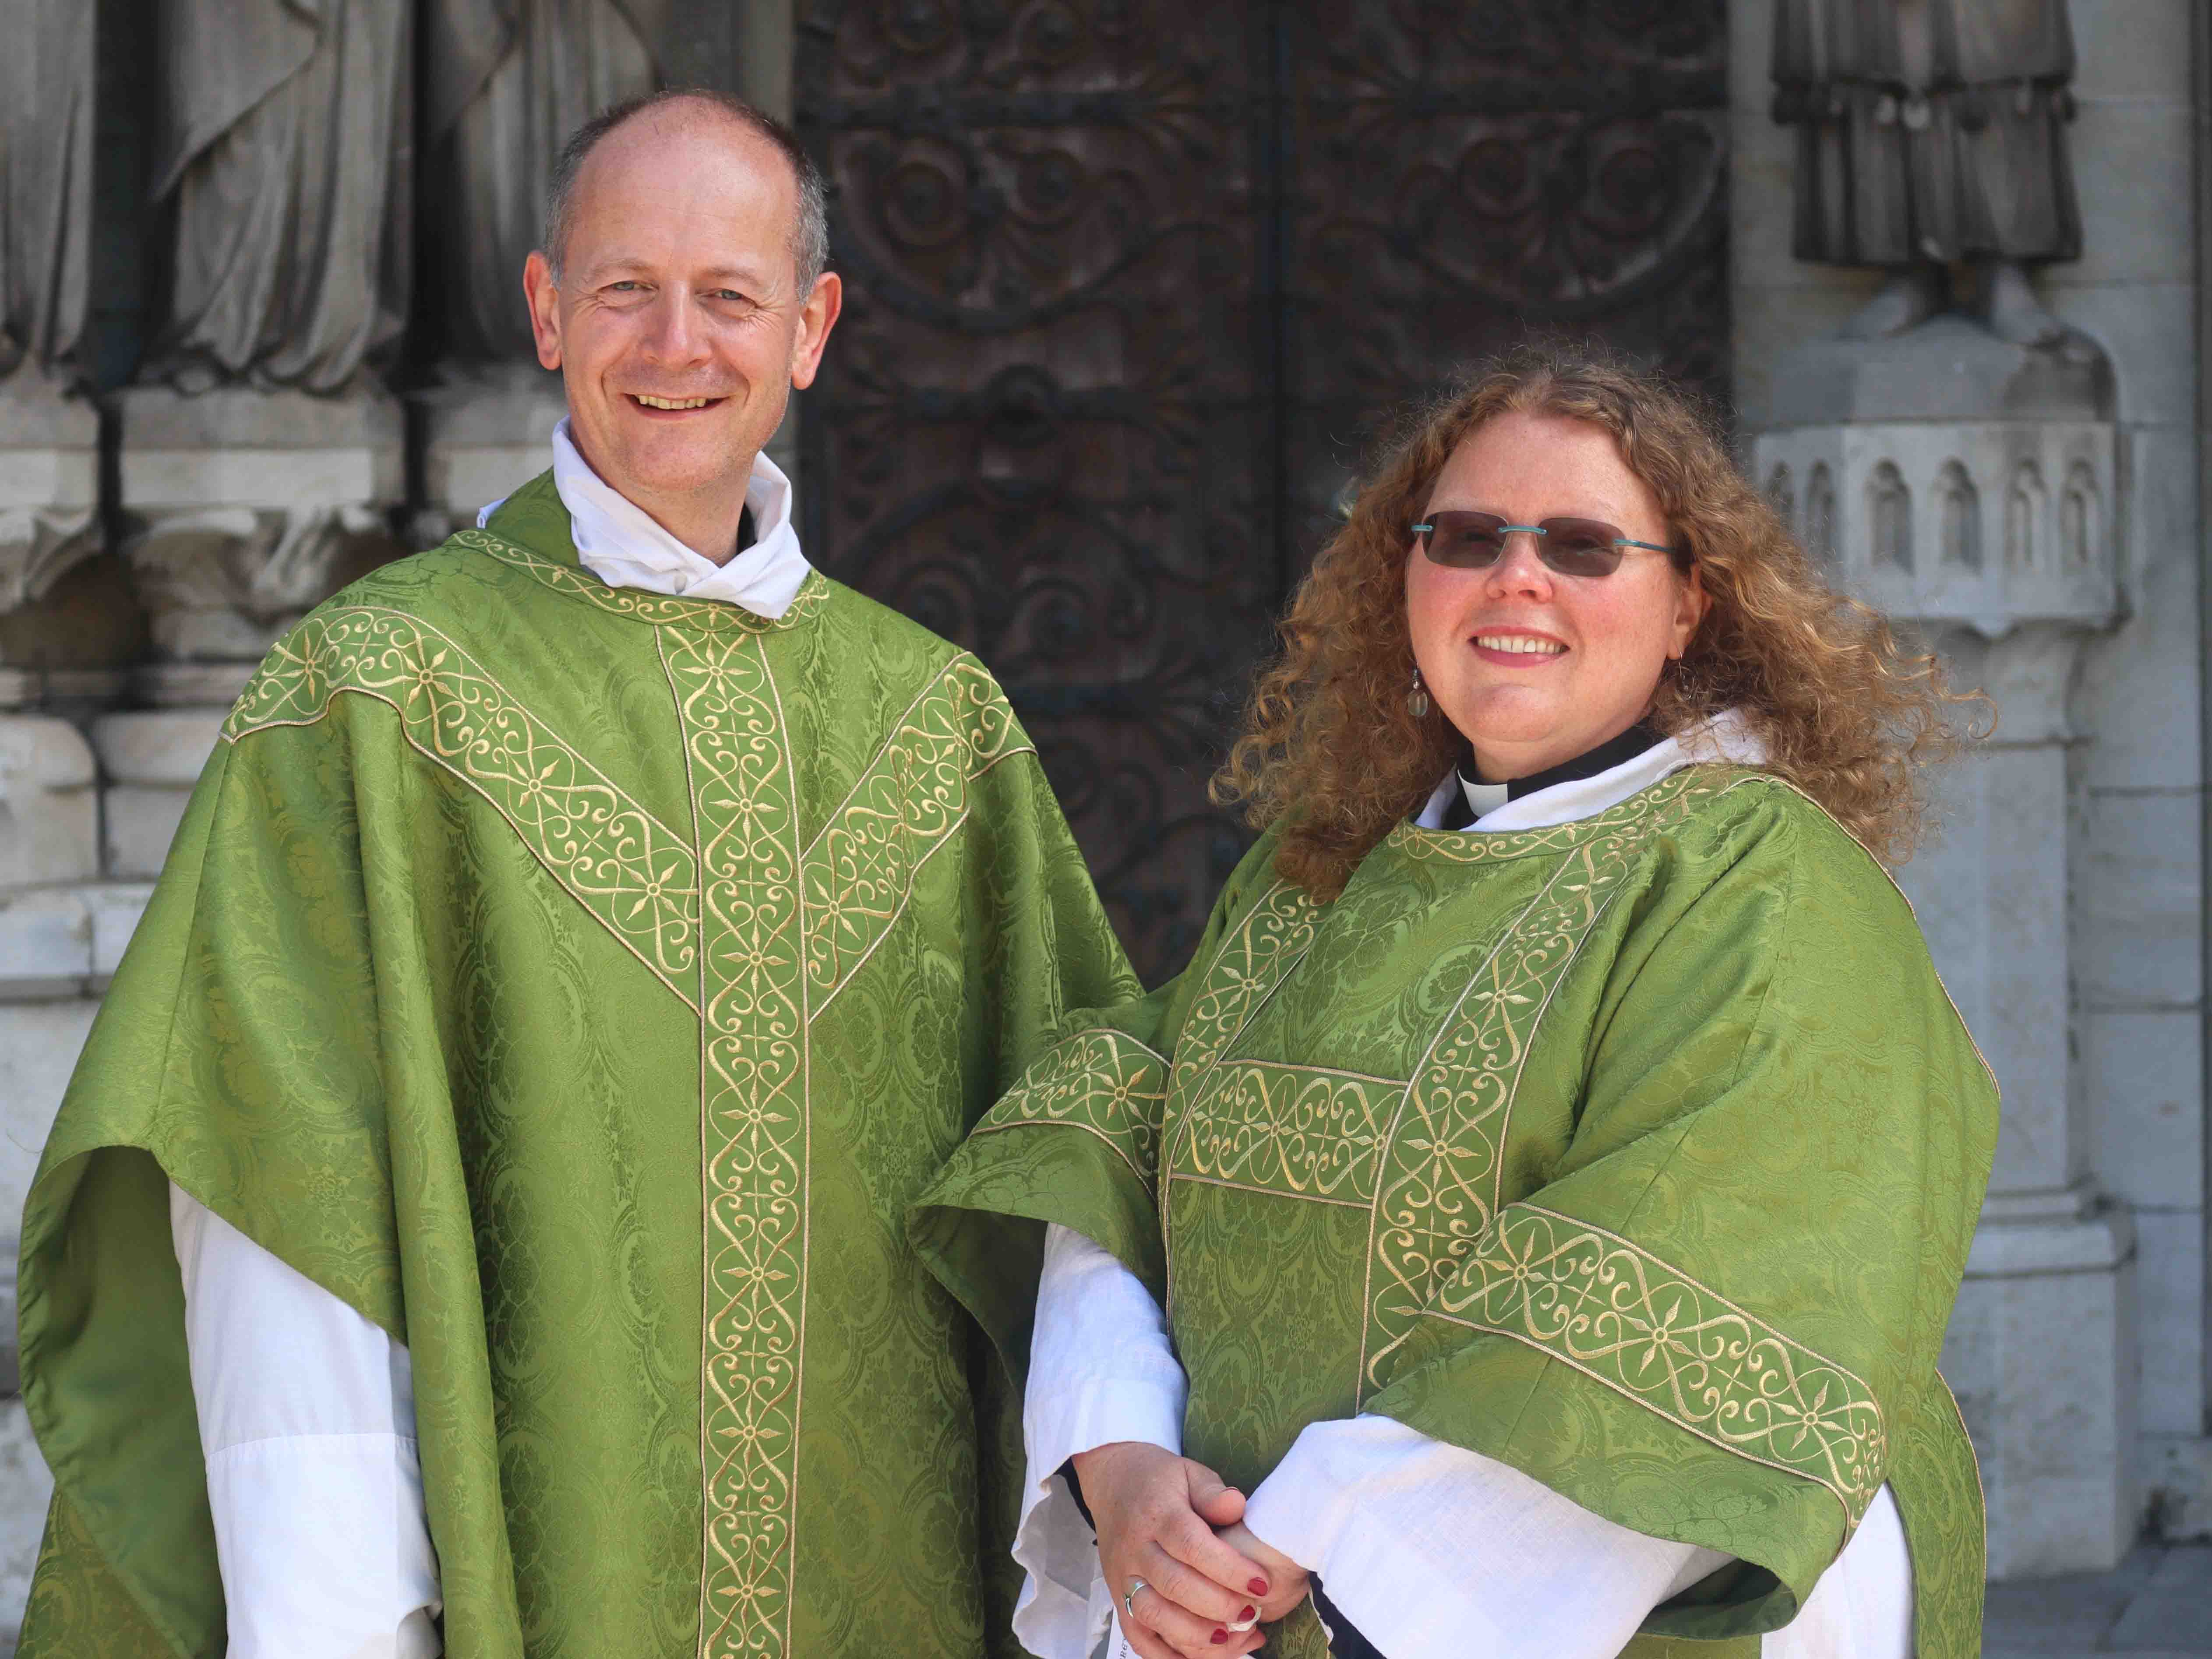 The Rev. Canon Dr Daniel Nuzum and the Rev. Julia Cody in front of St Fin Barre's Cathedral, Cork.